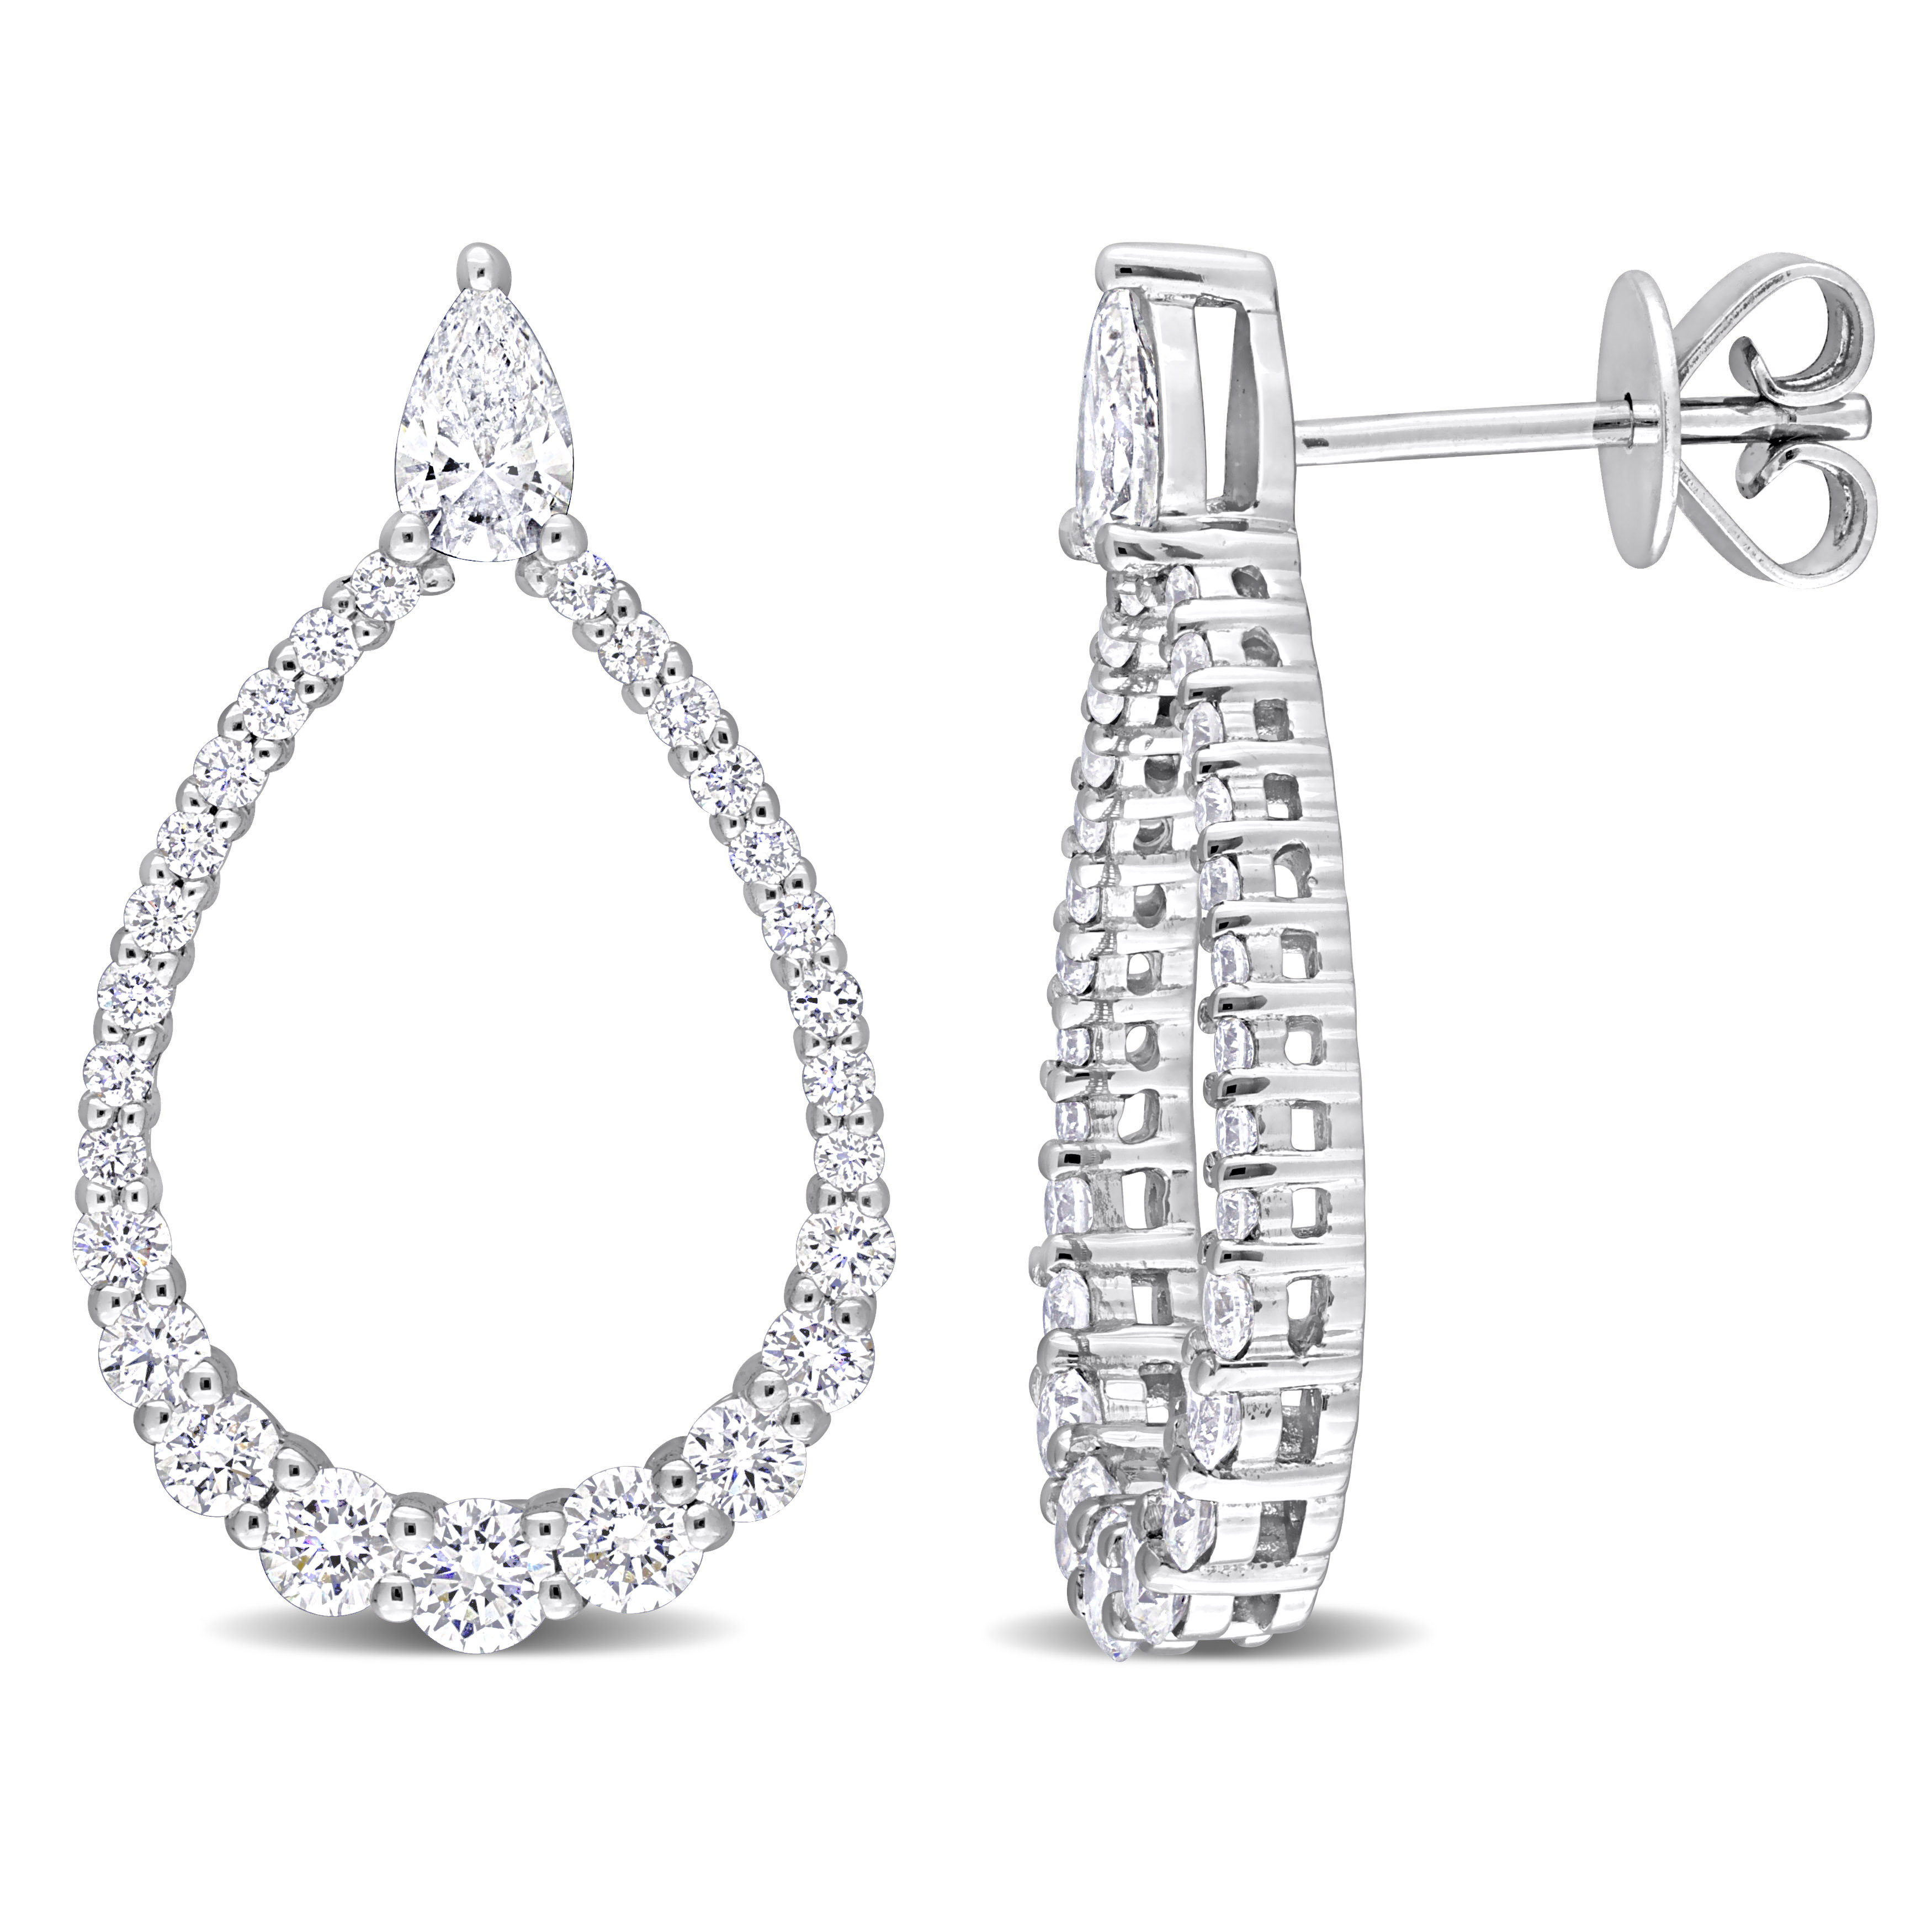 1 1/3 CT TW Pear & Round Lab Created Diamond Open Earrings in 14k White Gold